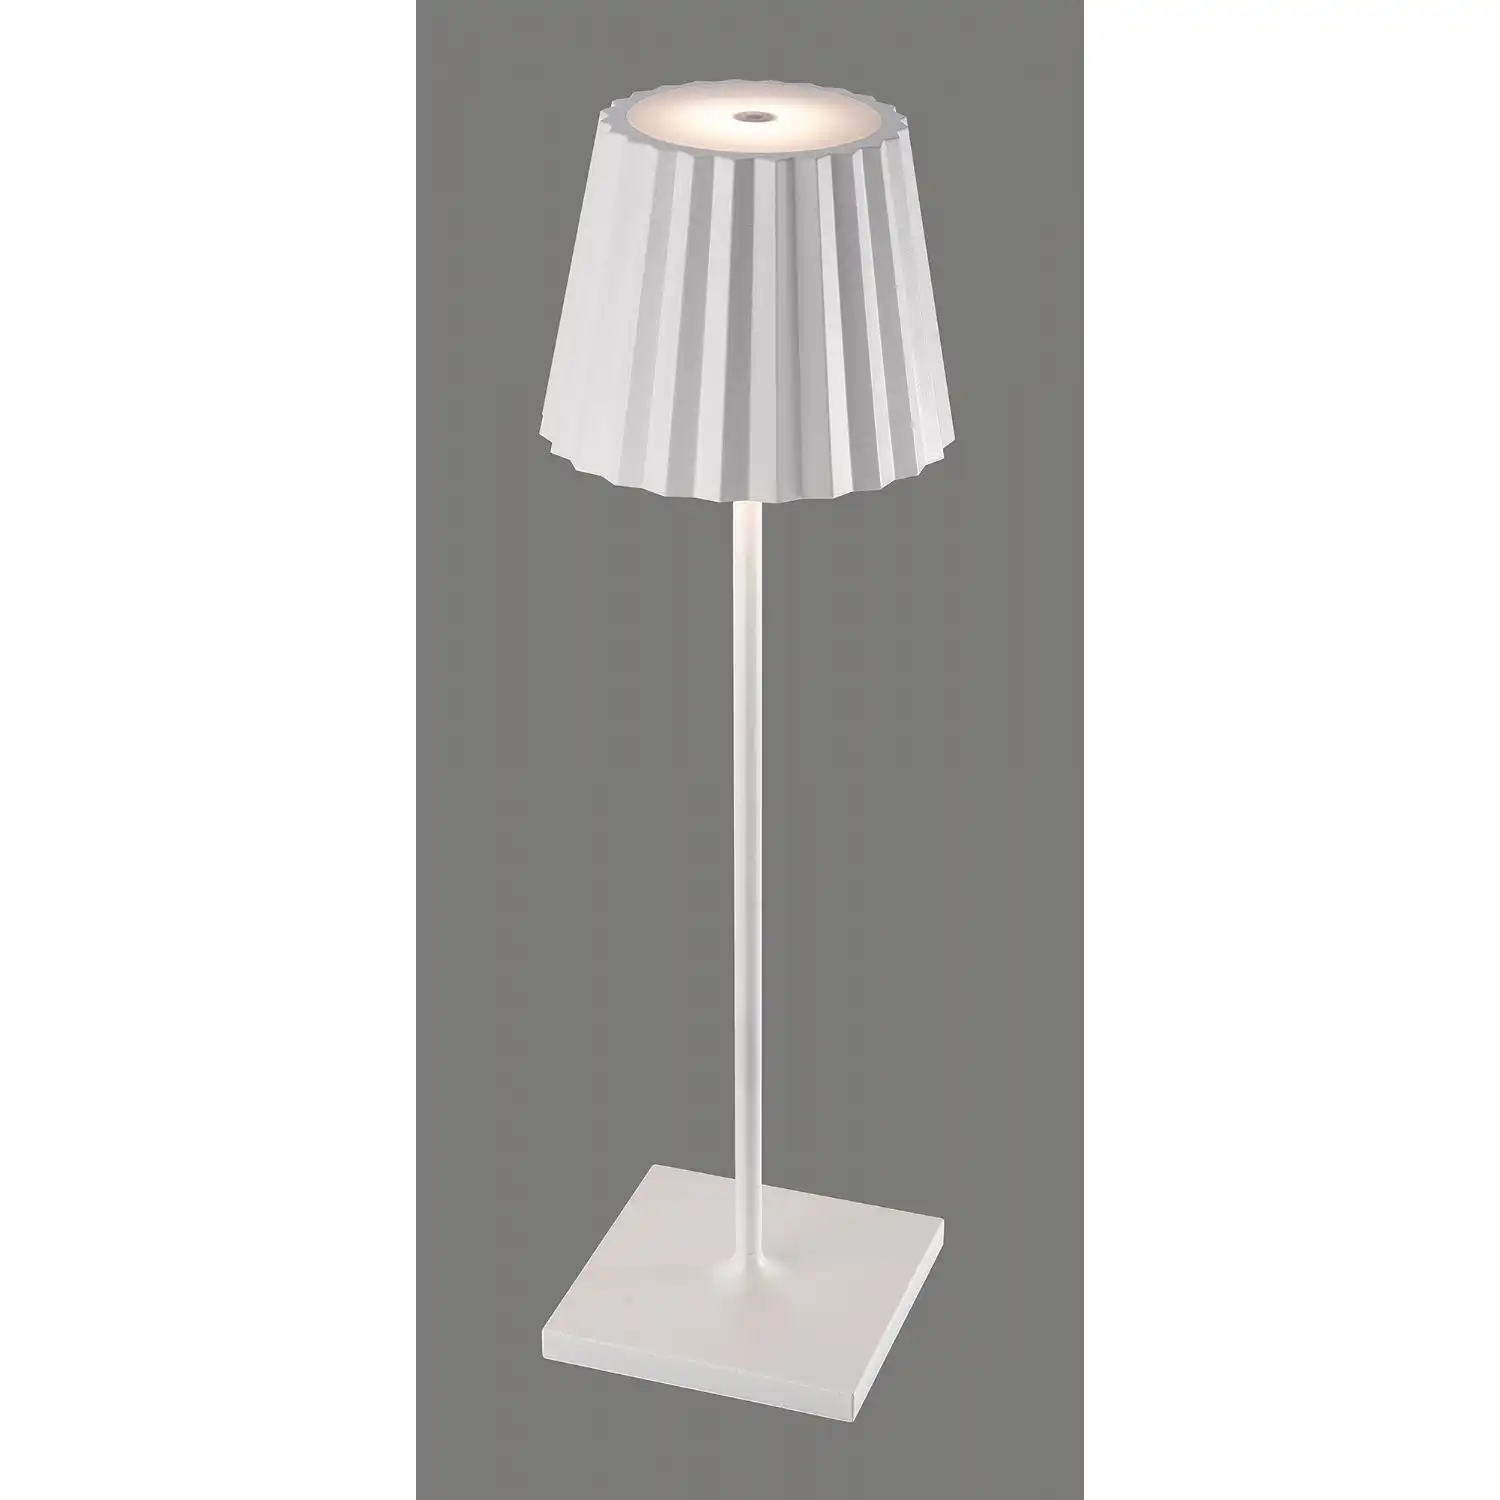 K2 Table Lamp, 2.2W LED, 3000K, 188lm, IP54, USB Charging Cable Included, White, 3yrs Warranty